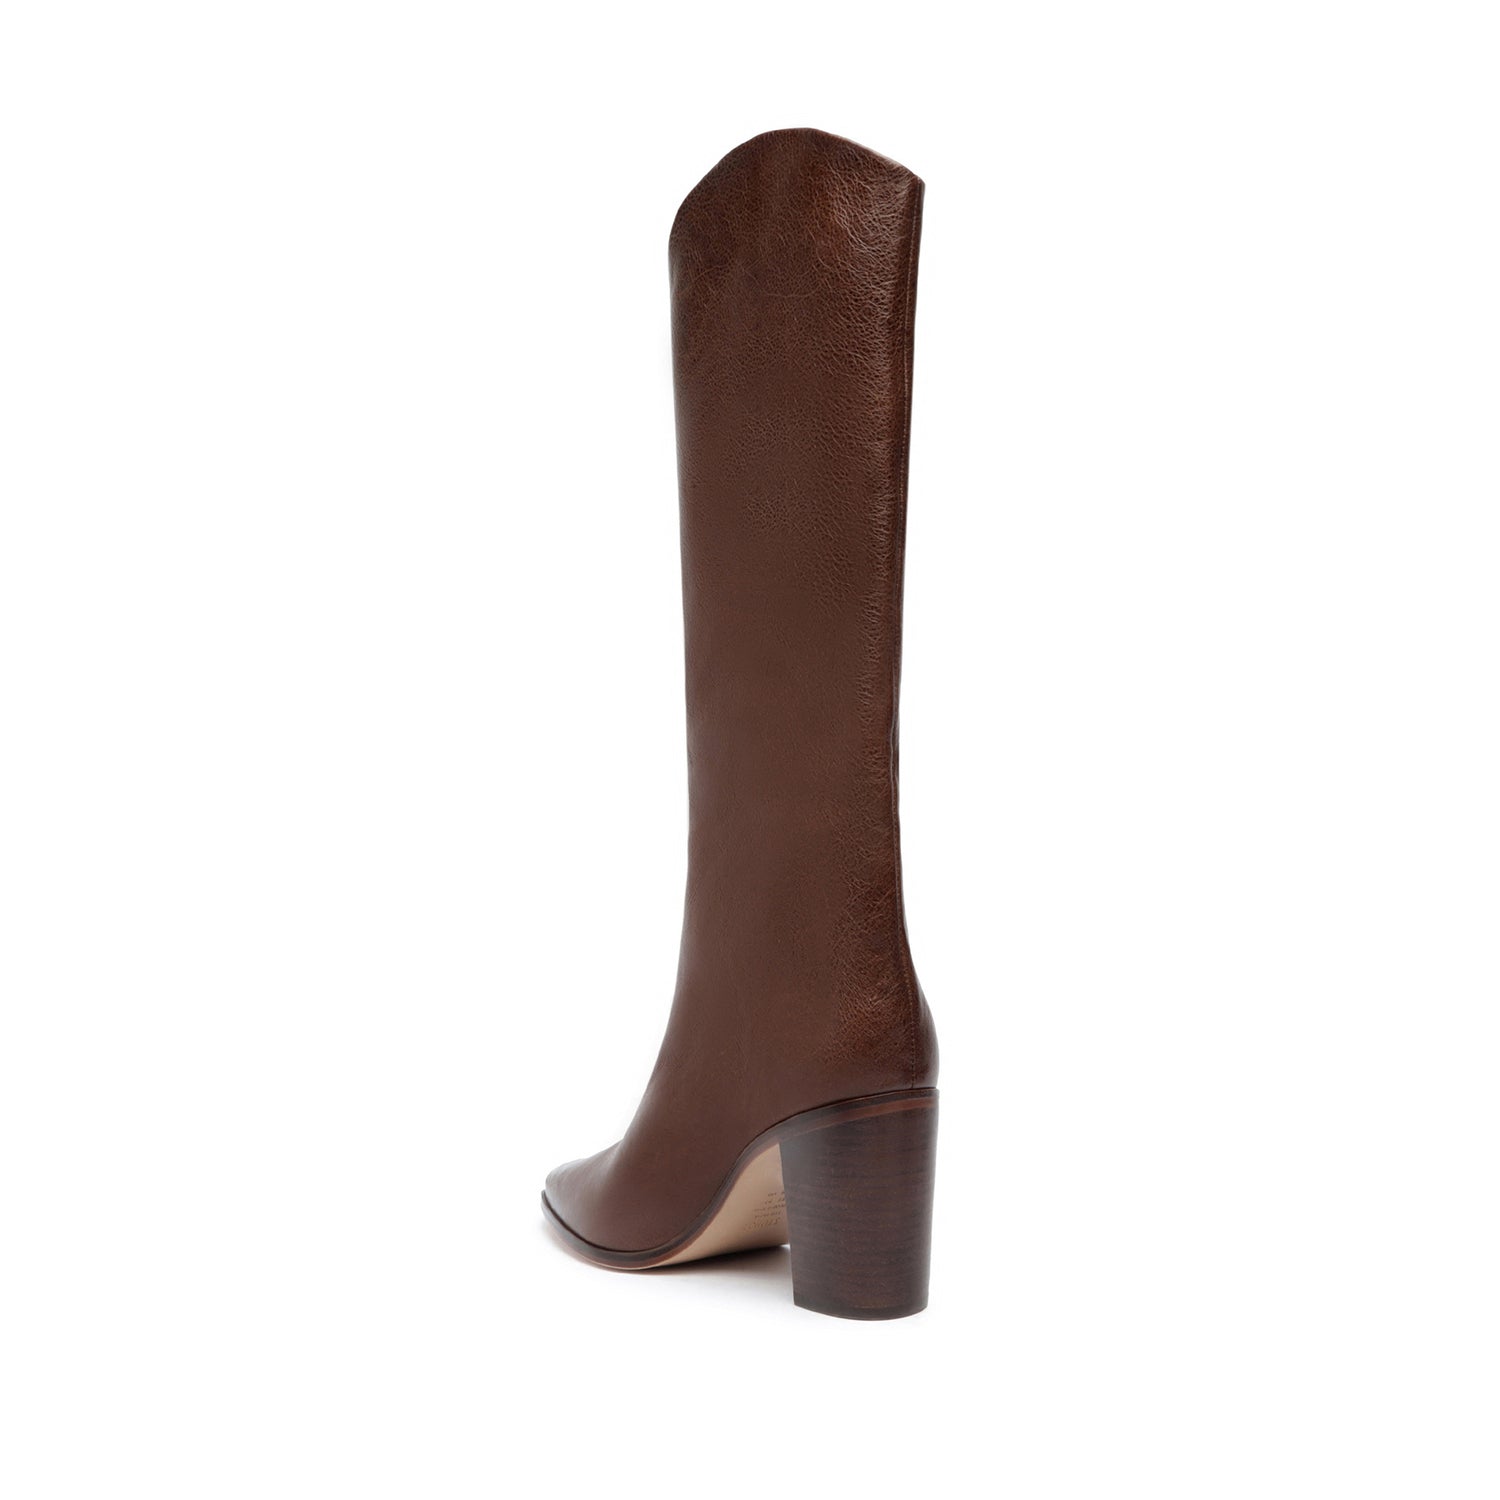 Maryana Block Leather Boot Boots Open Stock    - Schutz Shoes